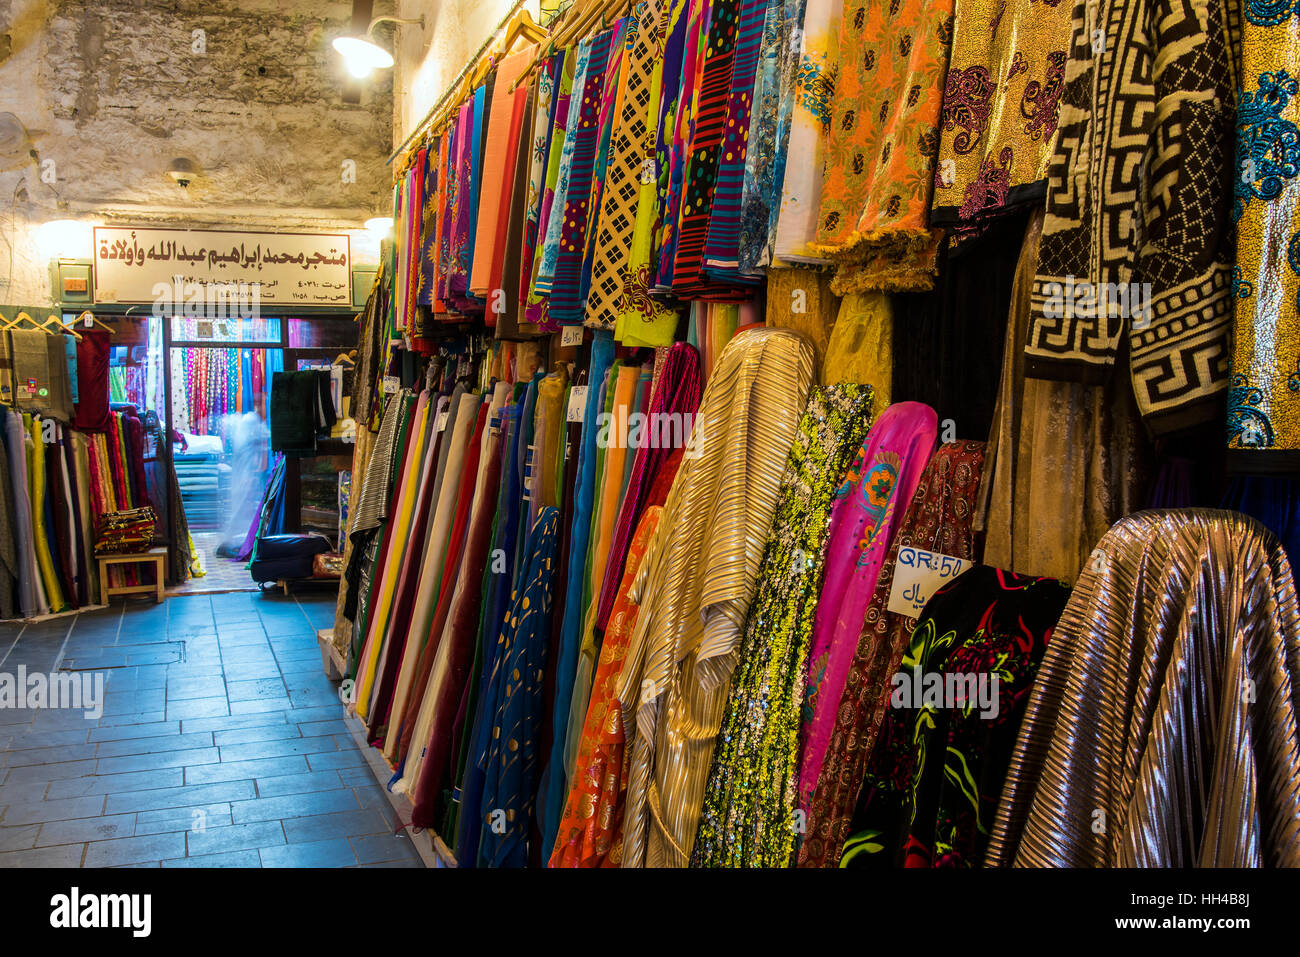 Traditional dresses for sale at the Souq Waqif market in Doha, Qatar Stock Photo